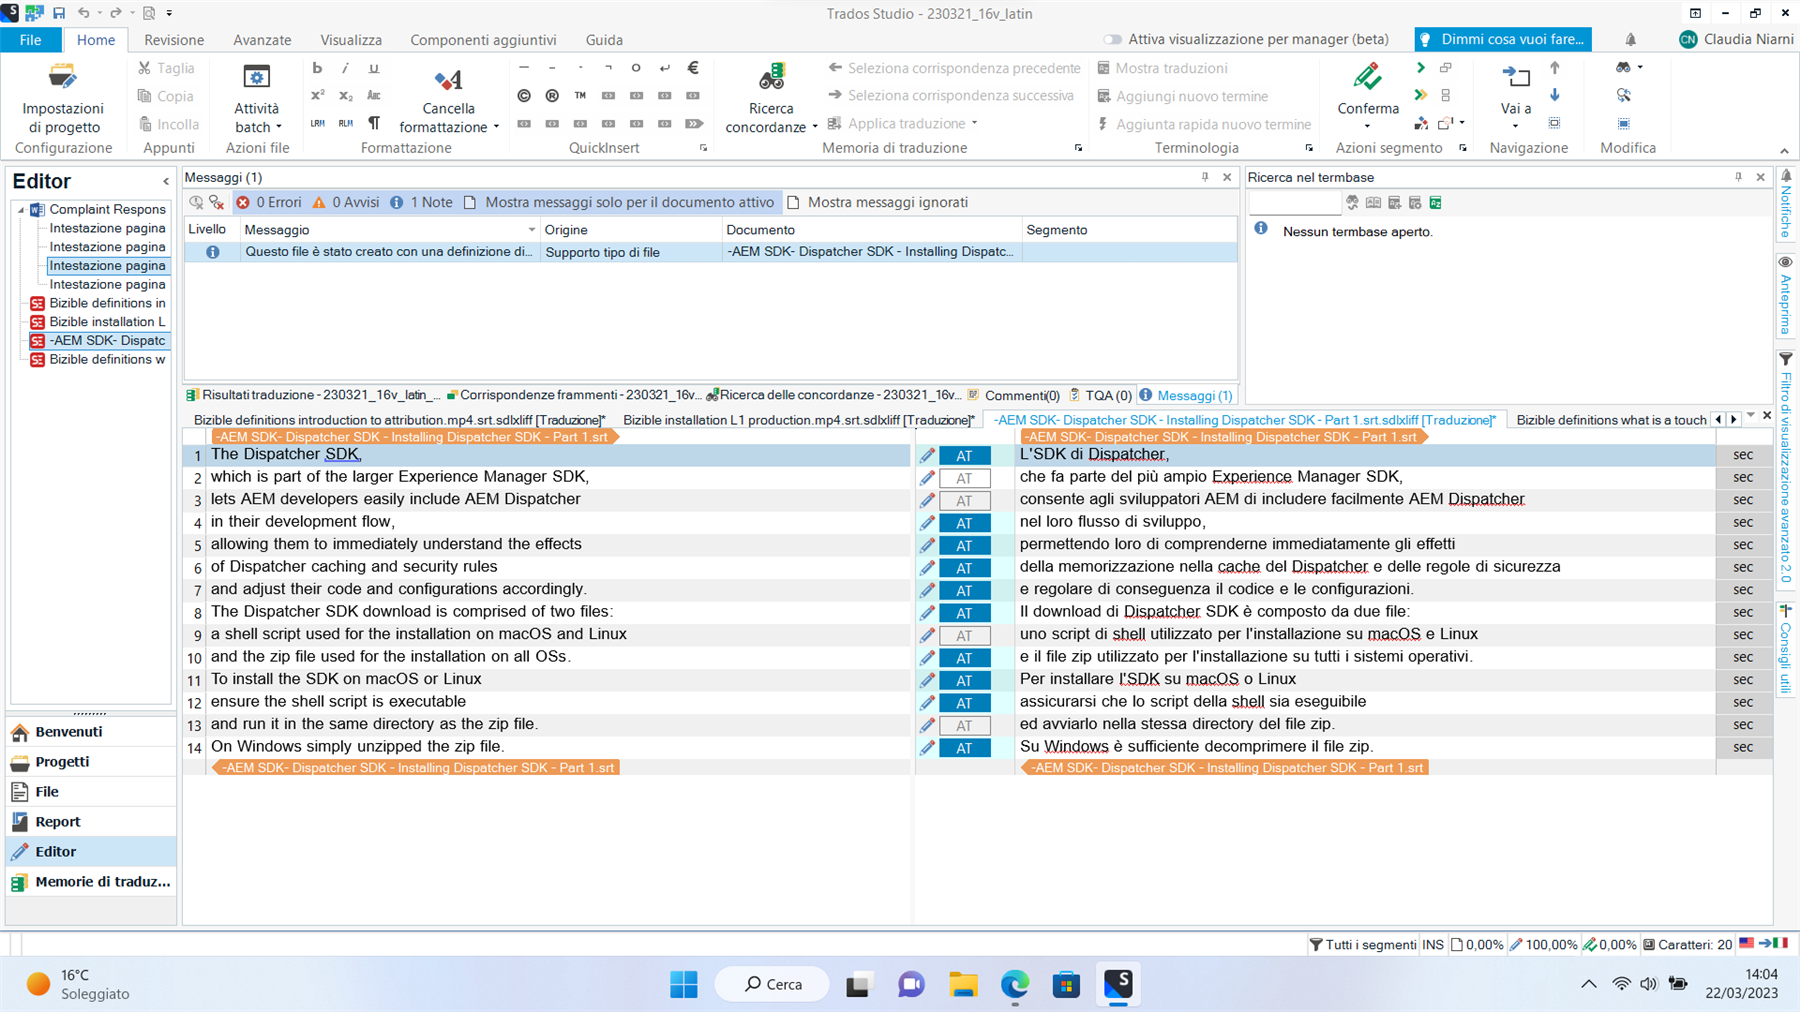 Trados Studio interface with an error message 'Supporto tipo di file' indicating an issue with file type support. The Editor pane shows a translation project with English and Italian text.